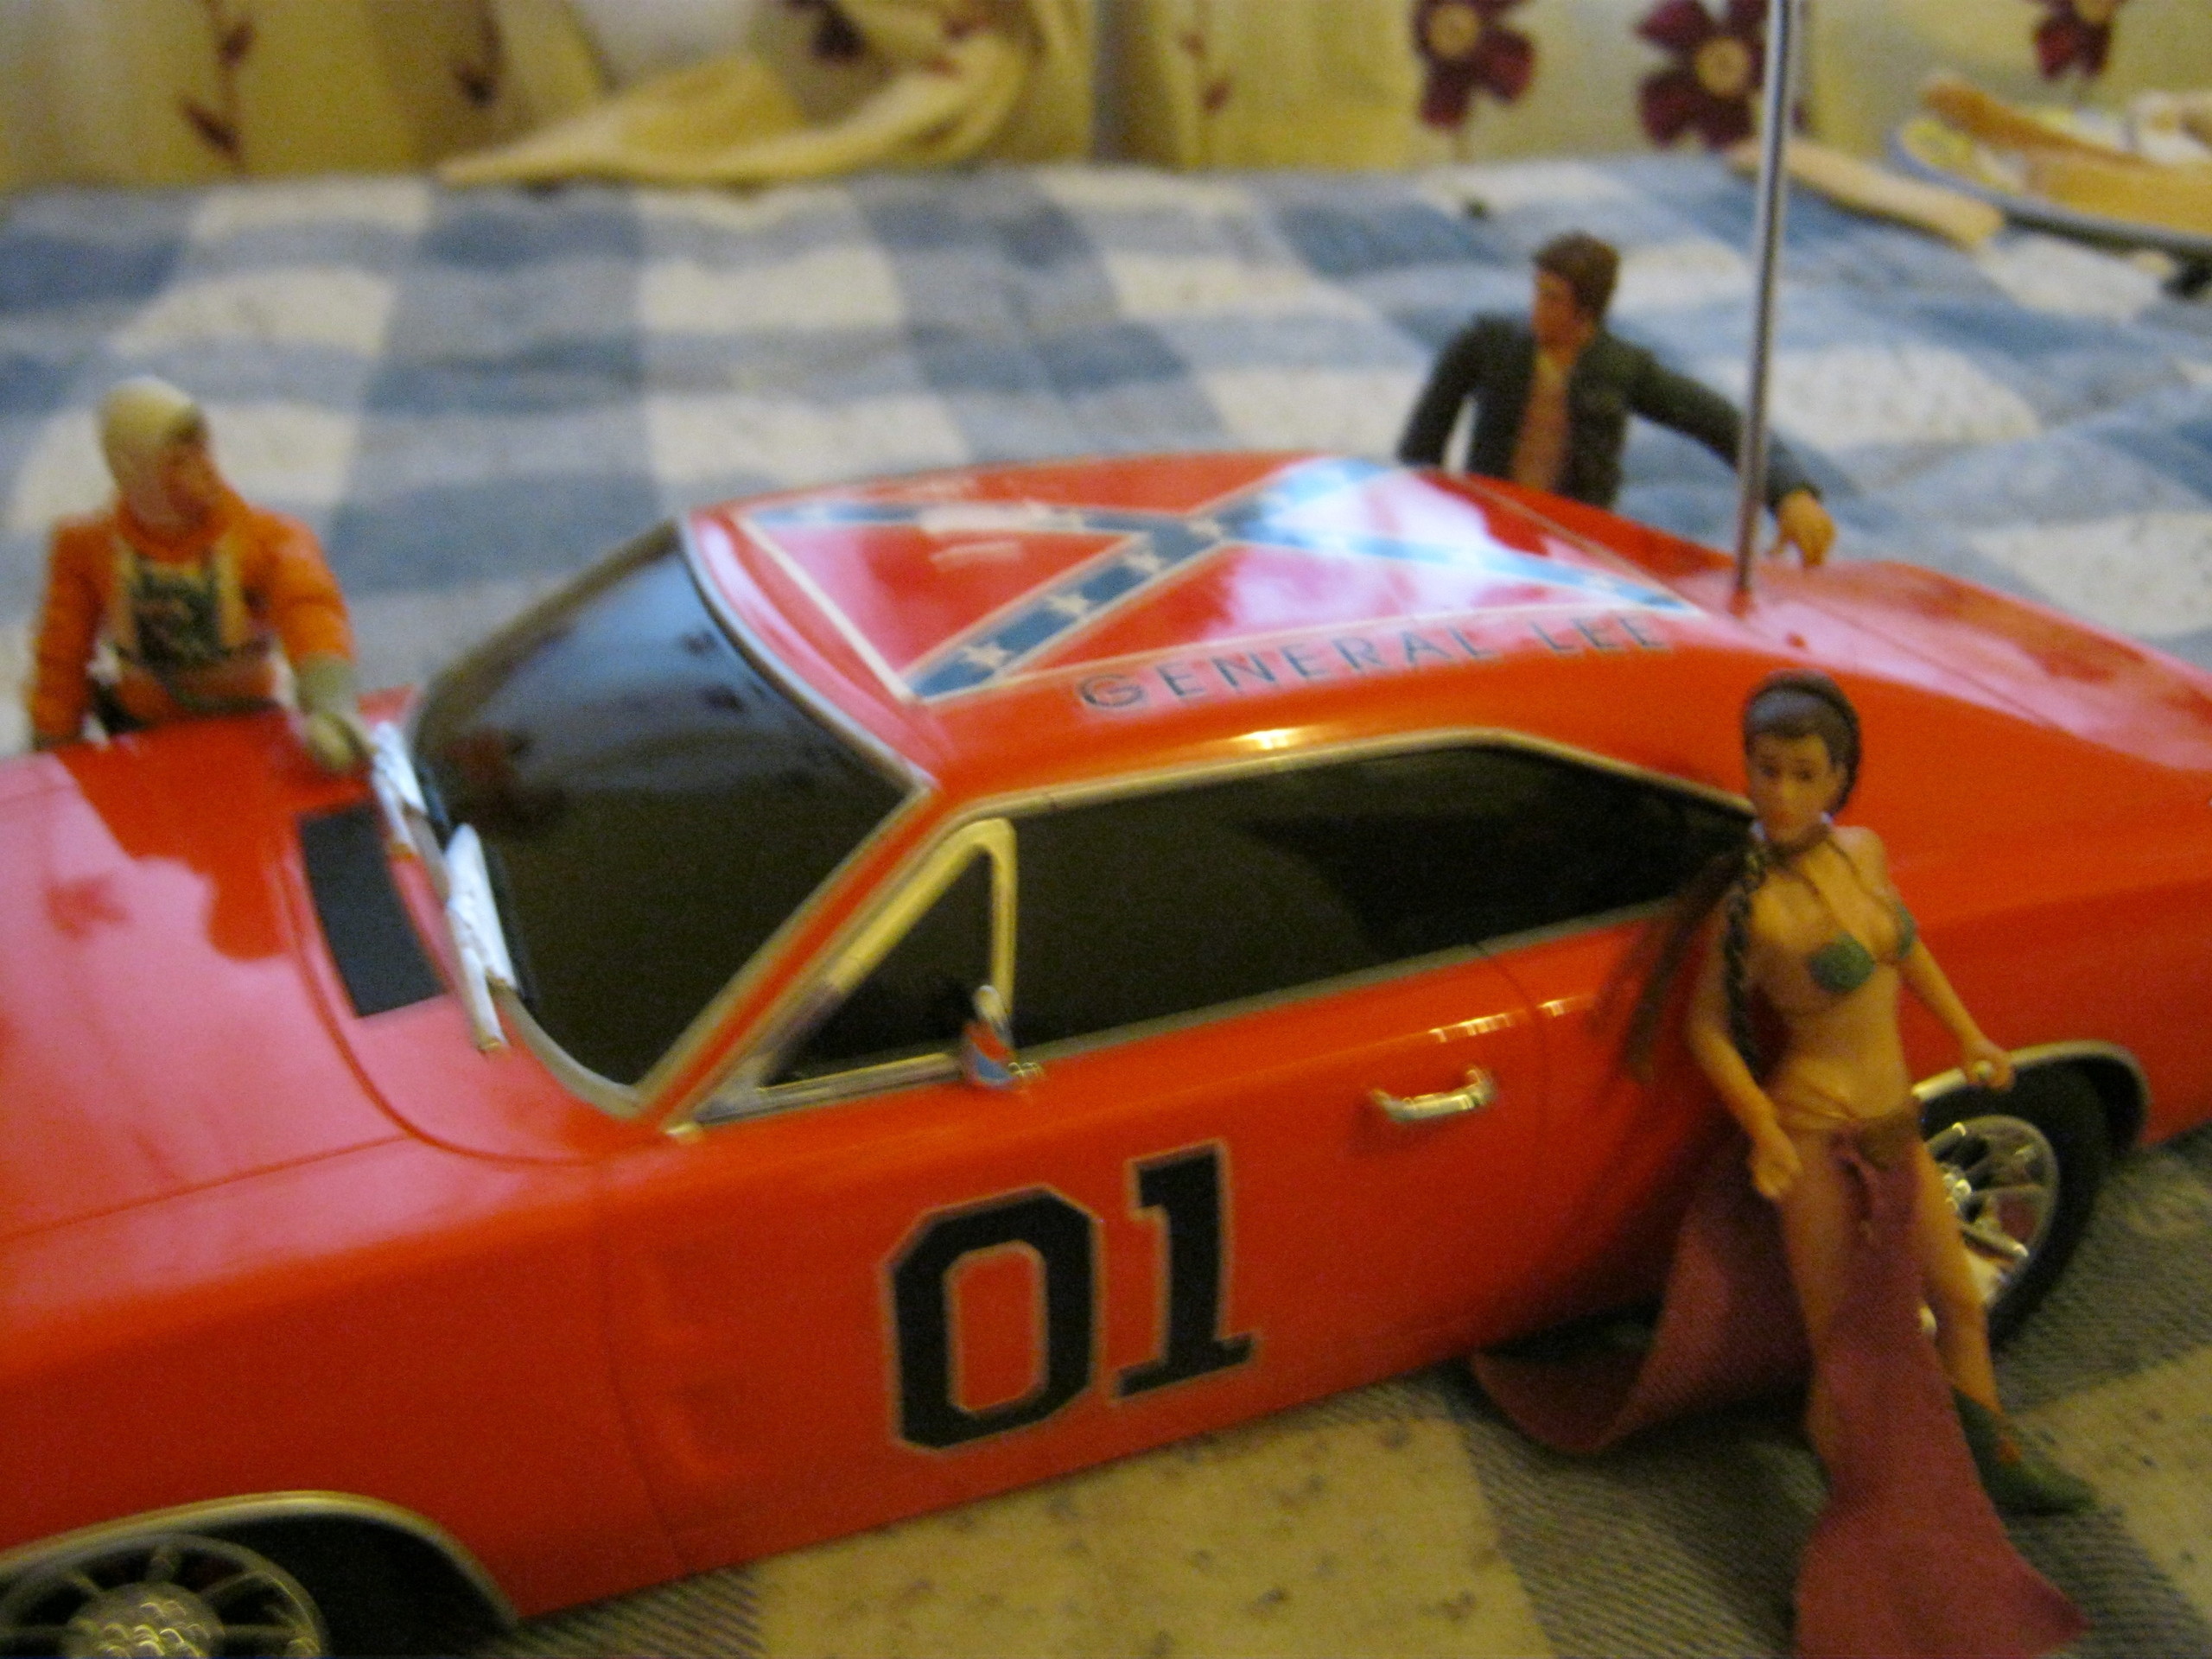 2560x1920 The Dukes Of Hazzard images dukes and lee HD wallpaper and background photos